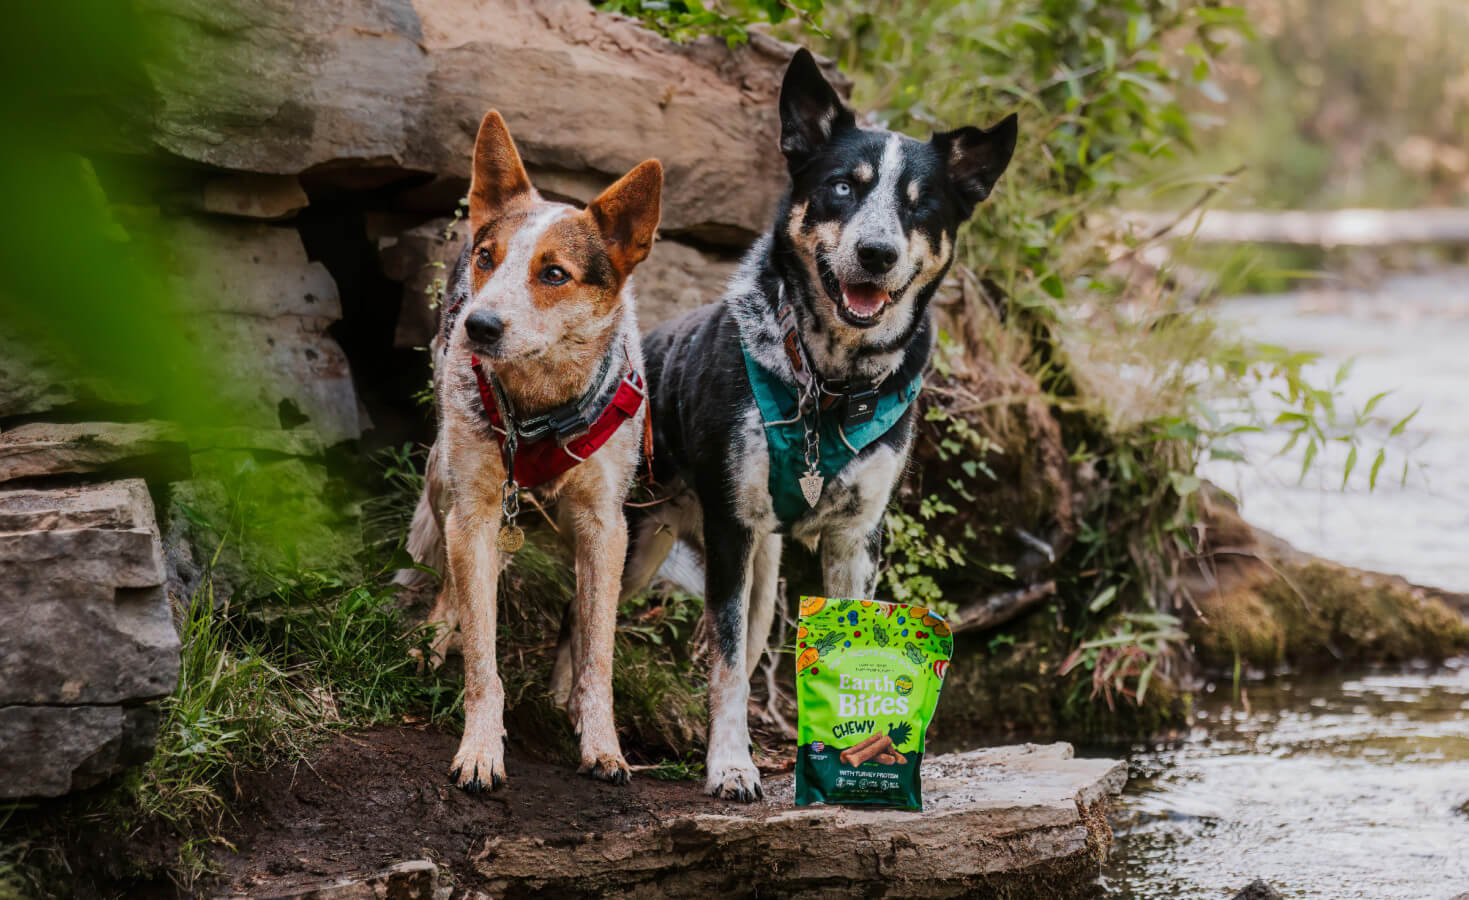 Two dogs stand next to a bag of EarthBites Chewy treats